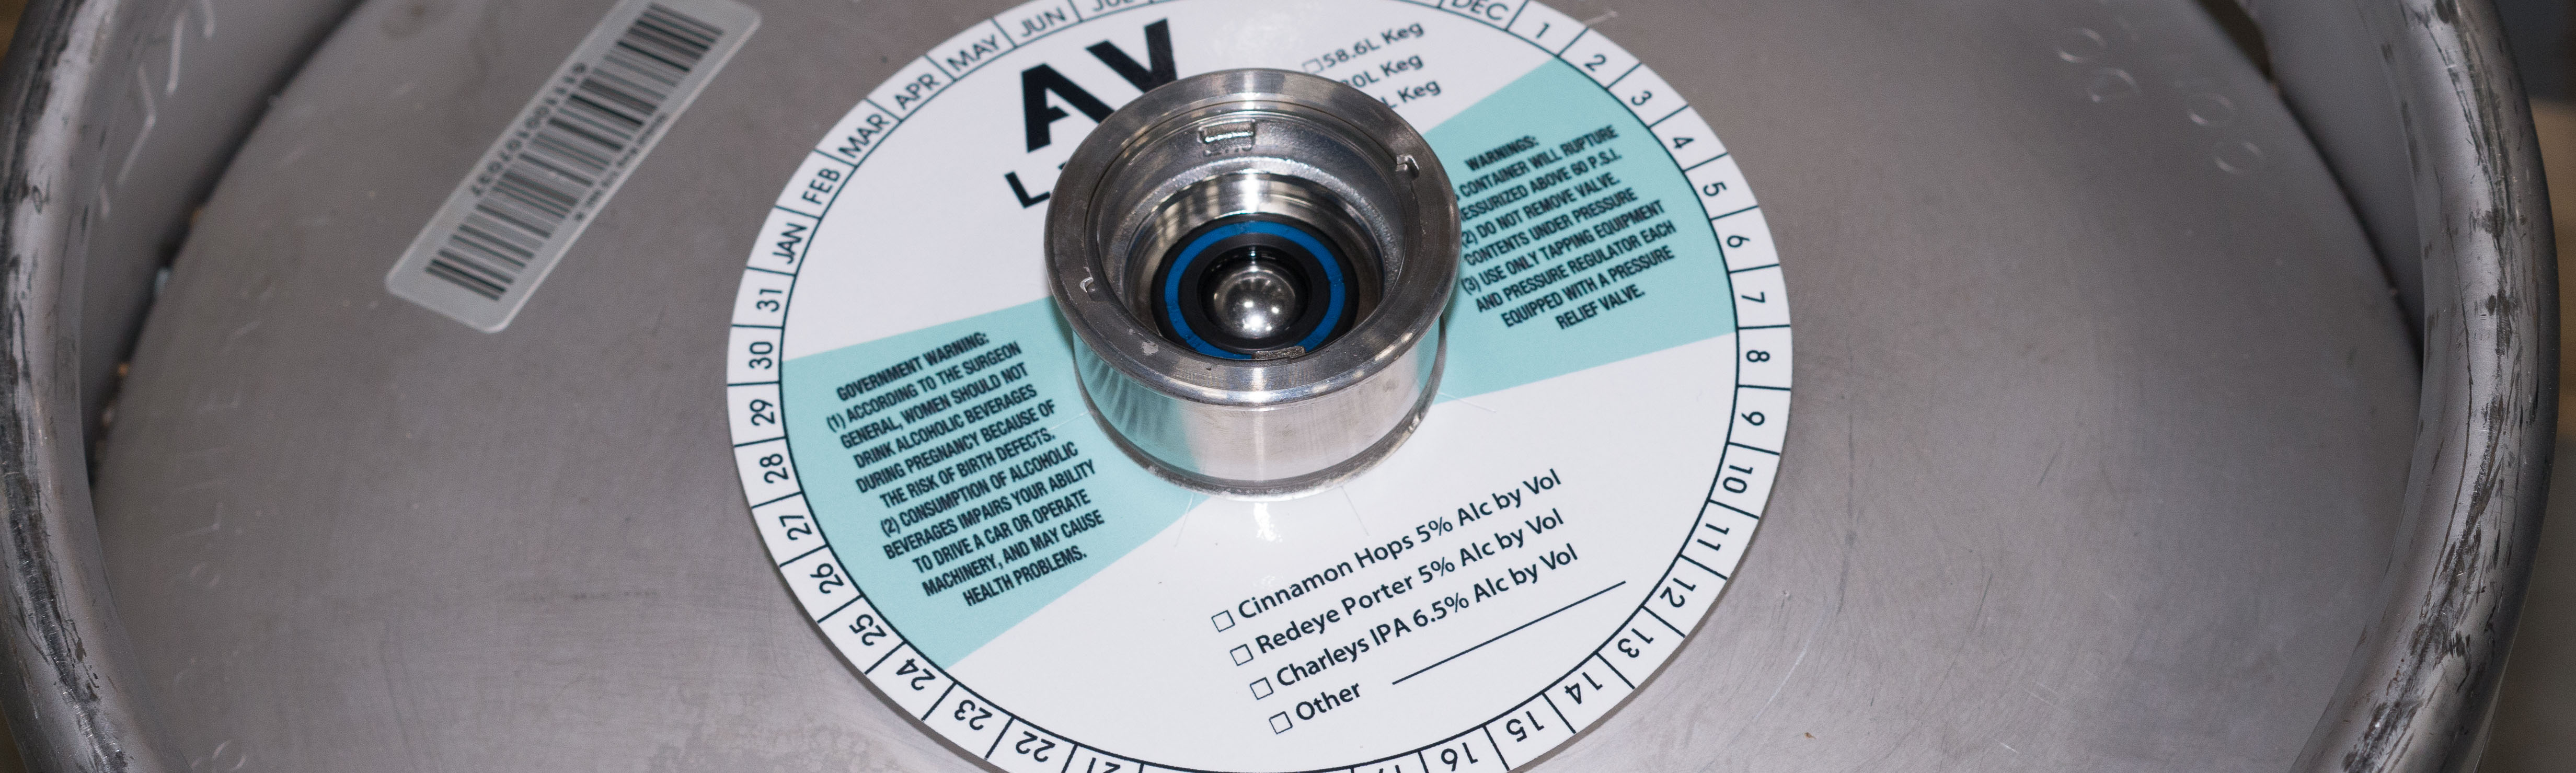 picture of a keg with keg collar, keg label and other branding